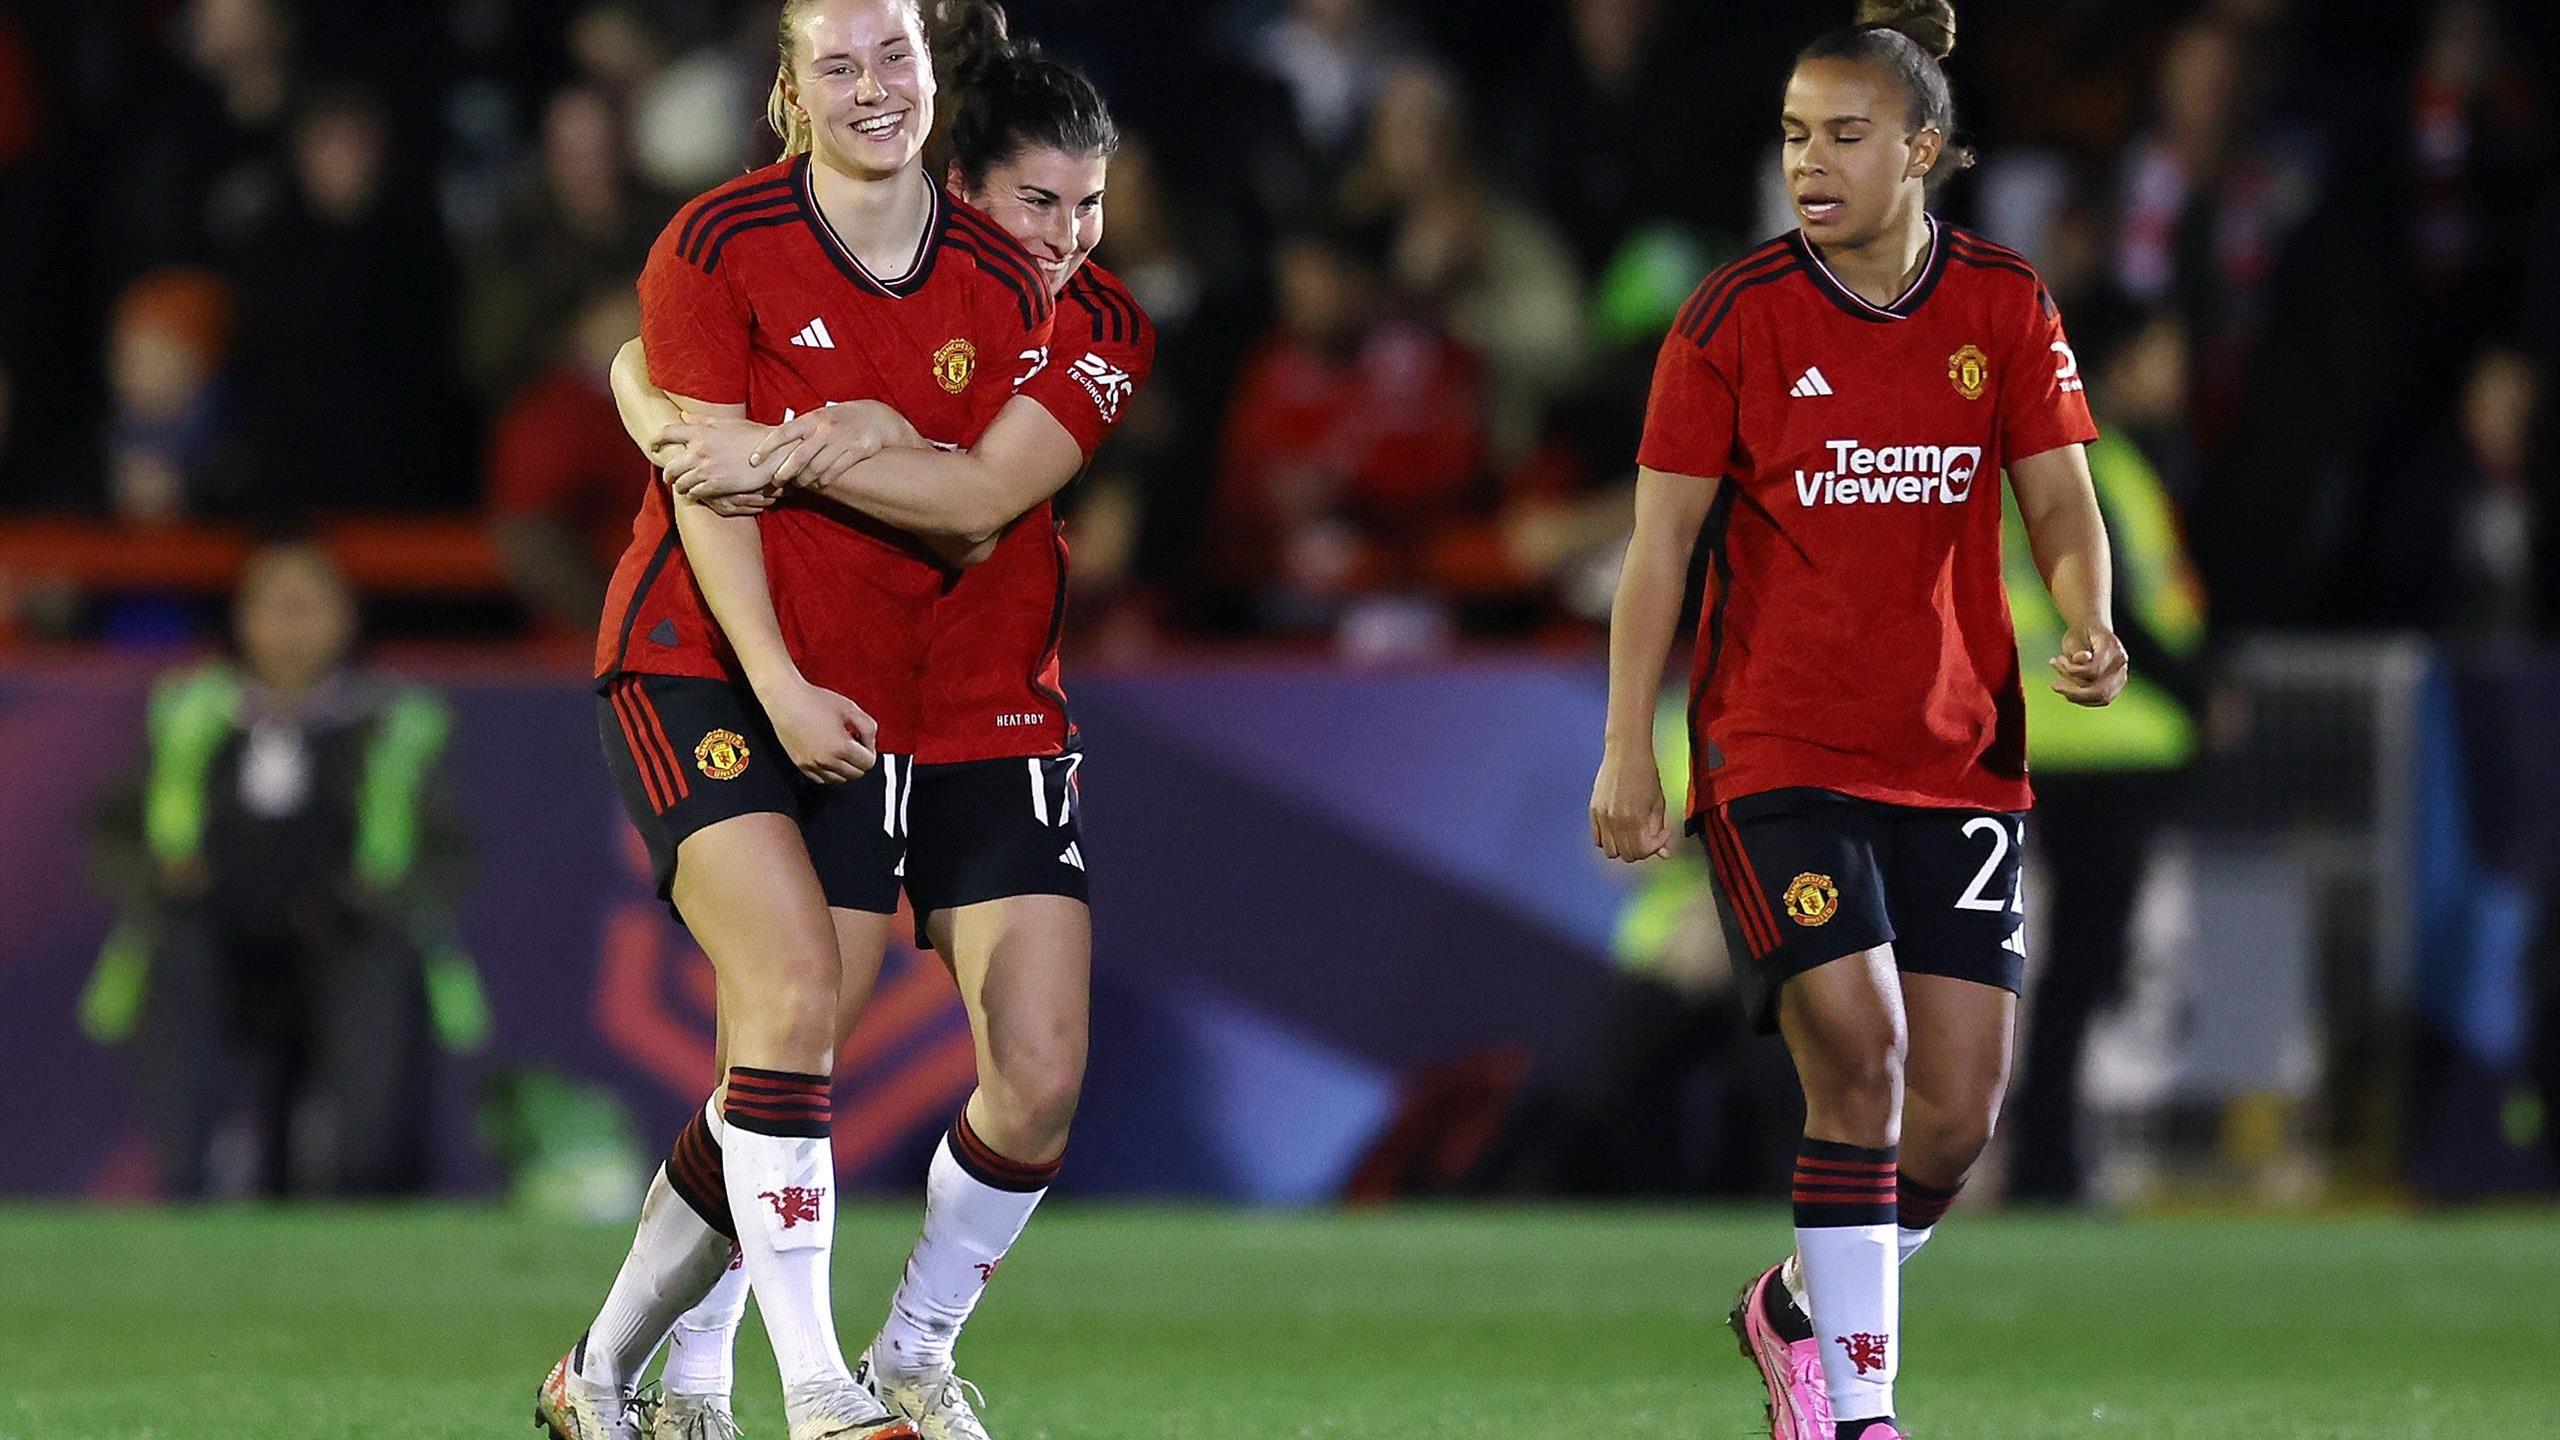 Women's FA Cup Nikita Parris on target as Manchester United cruise